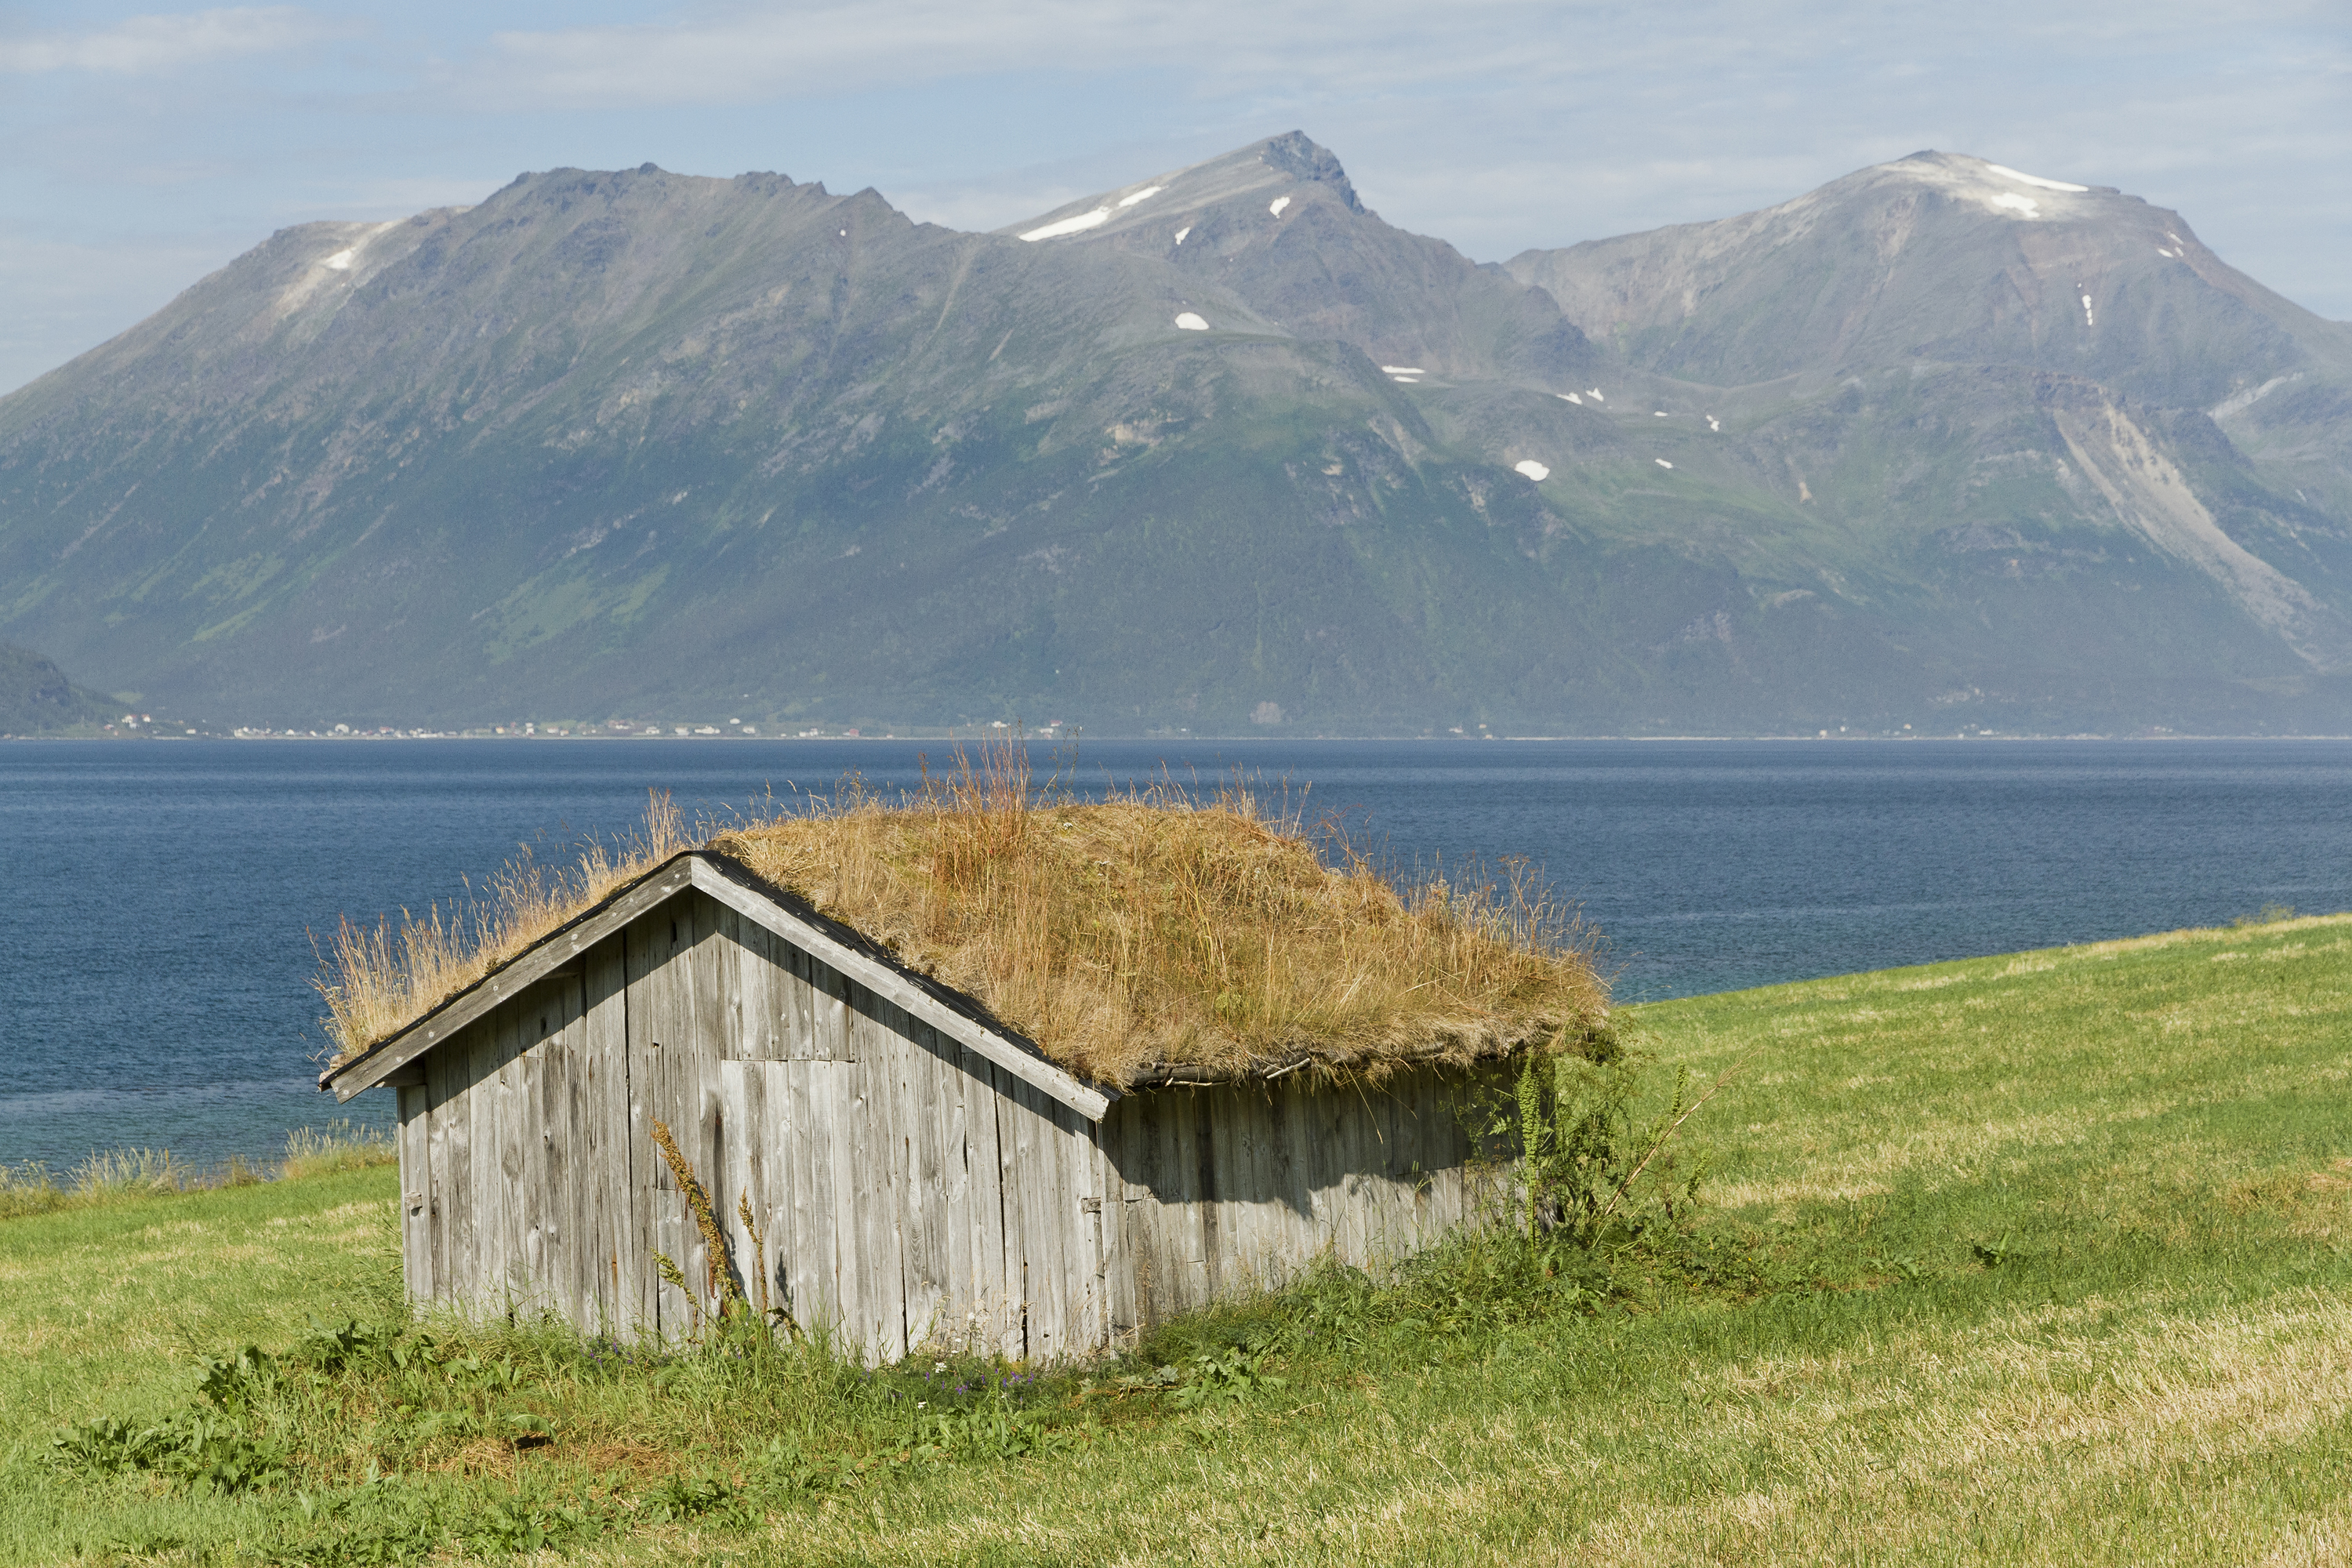 Shed with hay roof at Ullsfjorden, Lyngen, Troms, Norway, 2014 August